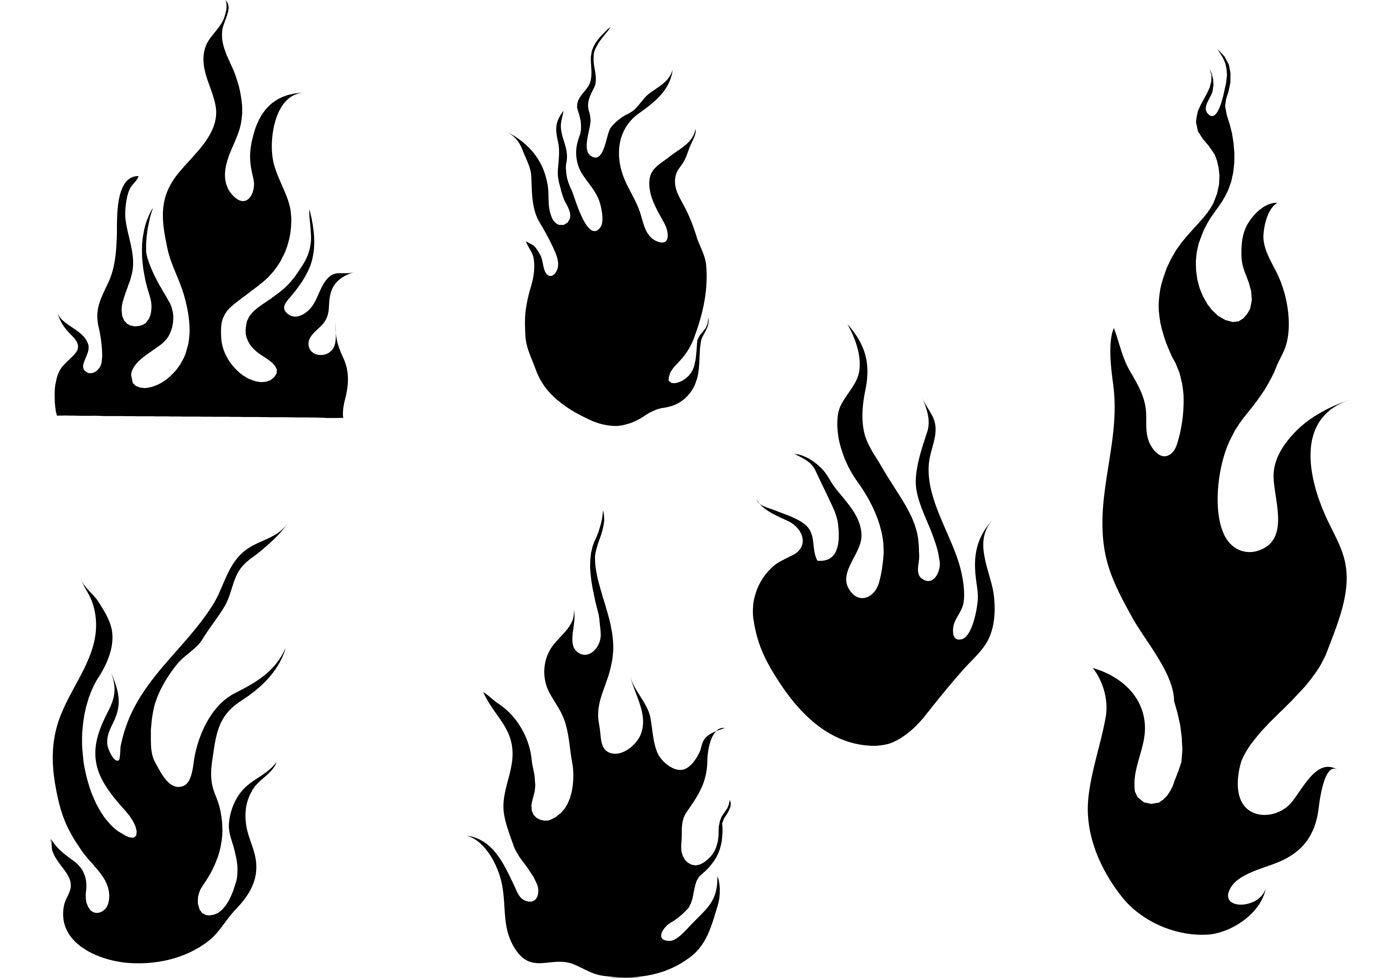 free vector clipart fire - photo #42